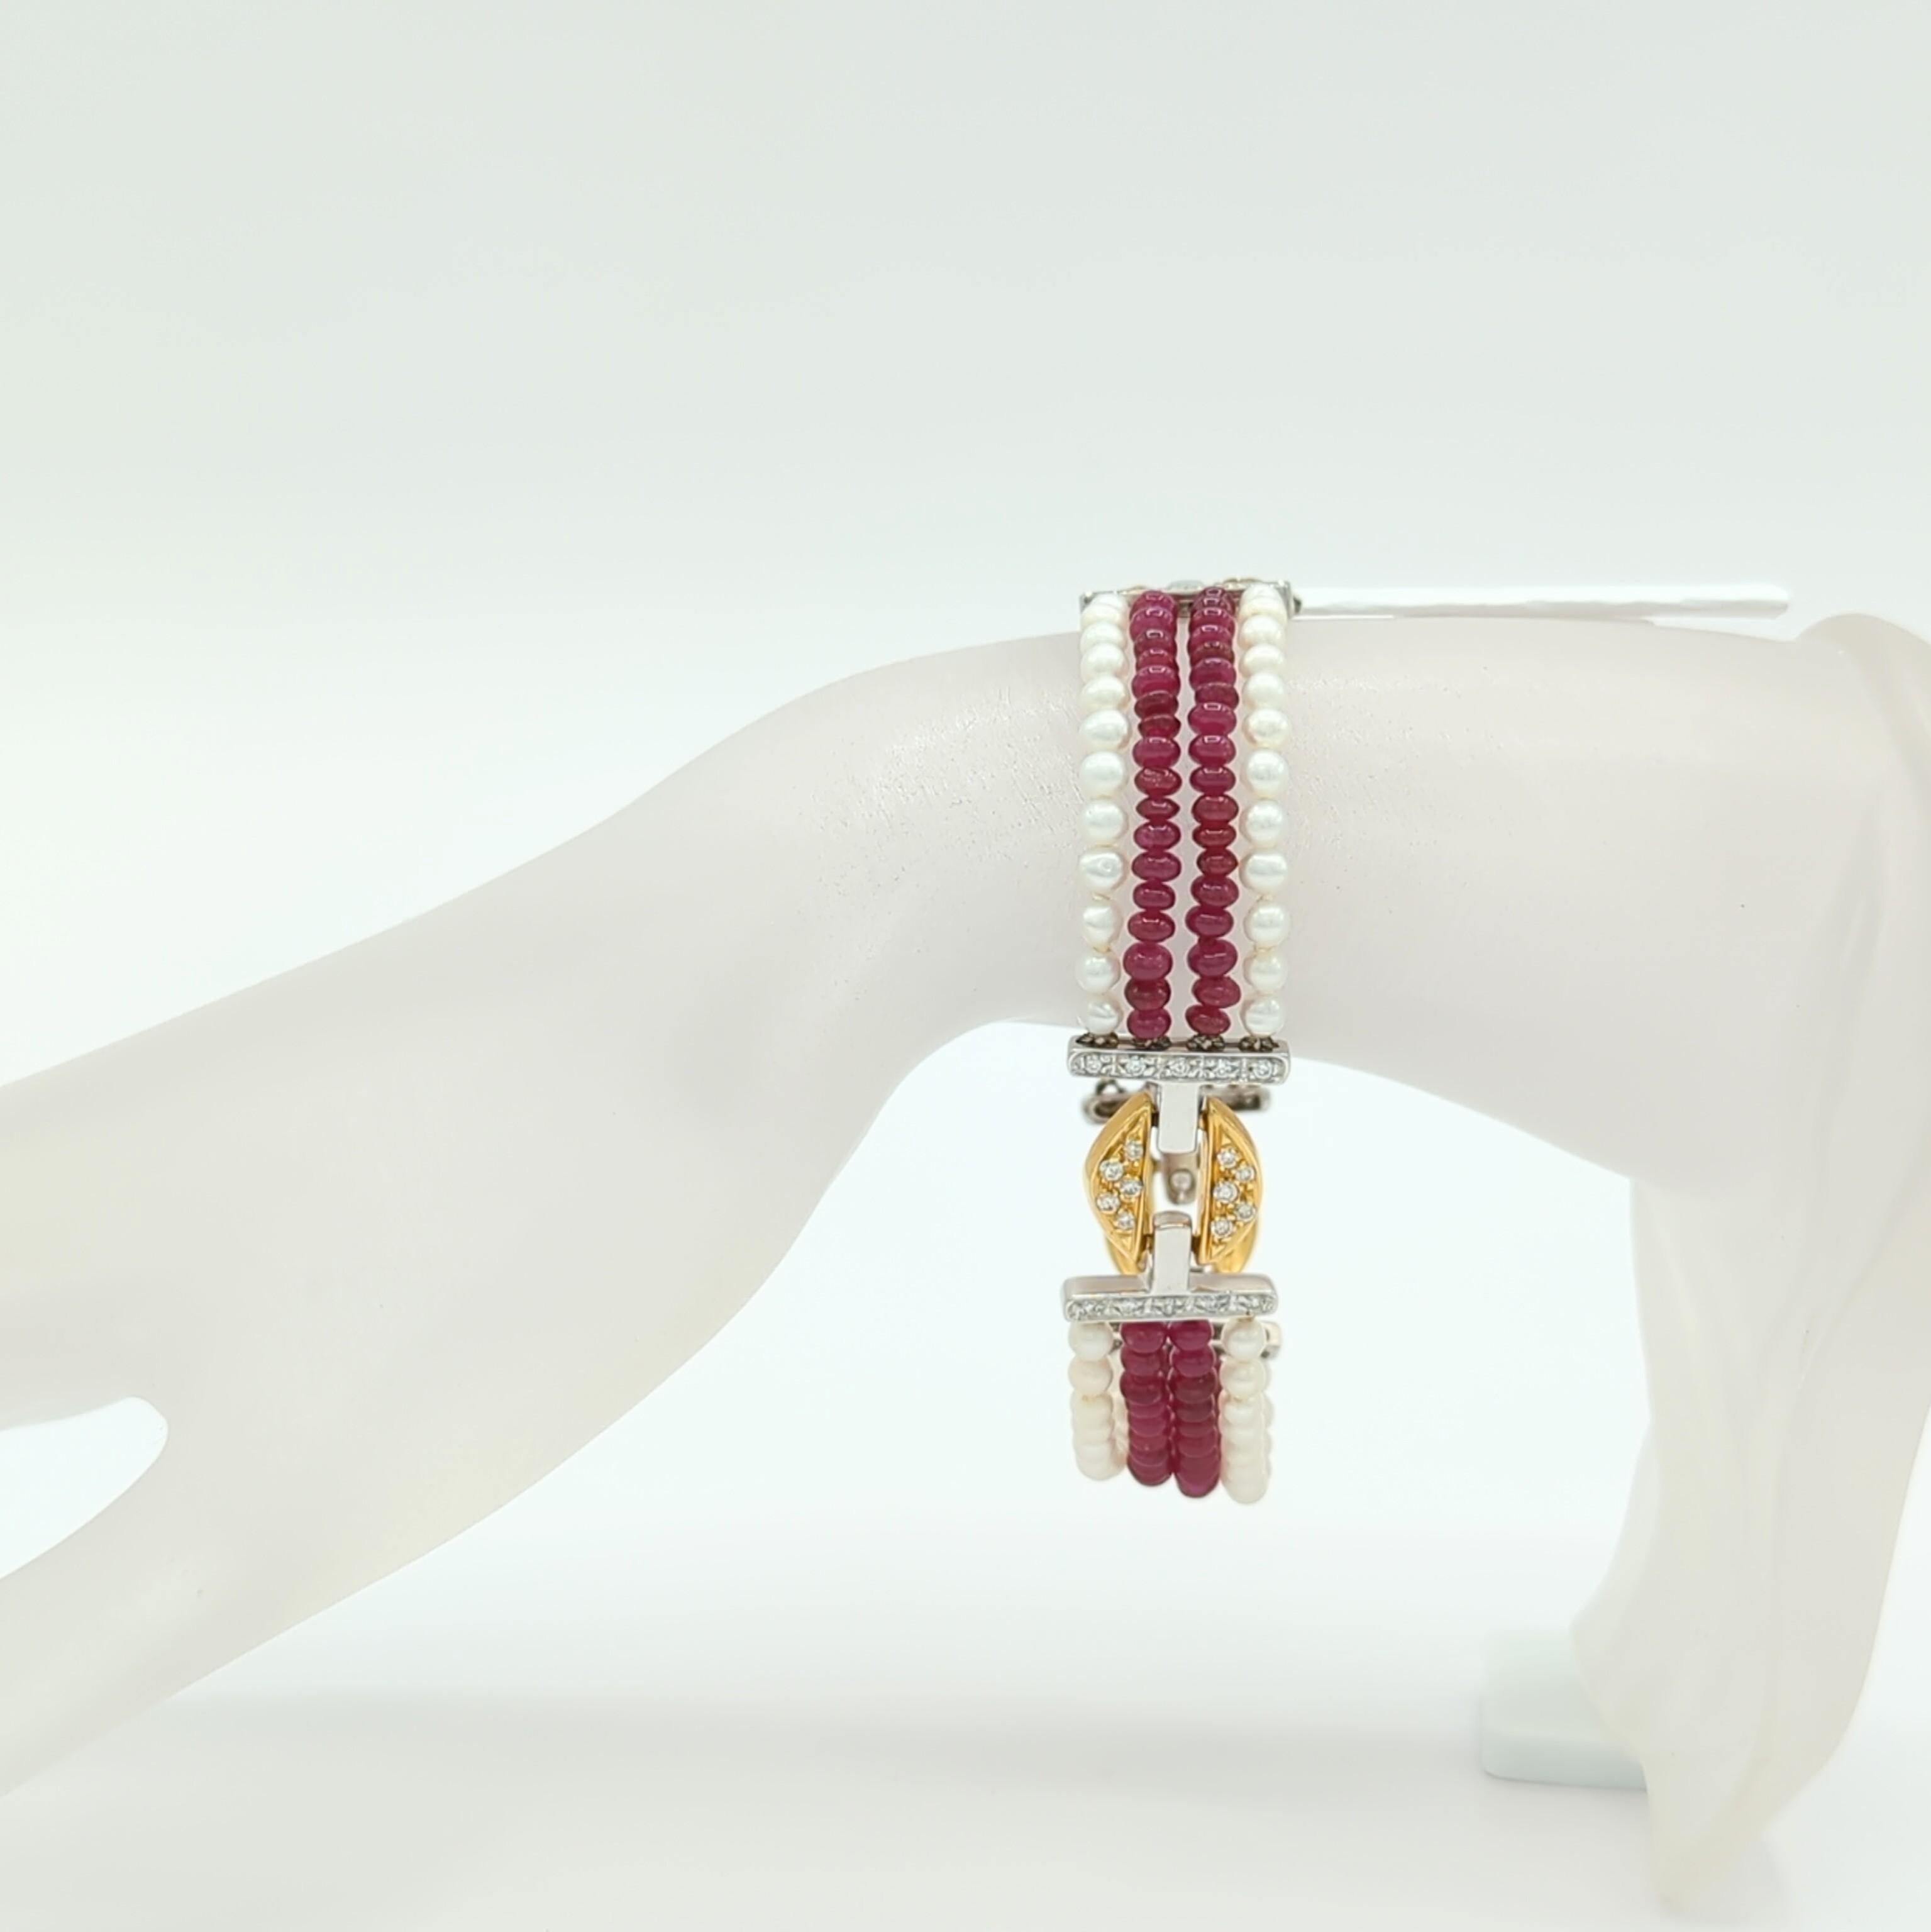 Beautiful 20.00 ct. of bright red ruby beads with 1.20 ct. of good quality, white, and bright diamond rounds.  Handmade in 18k yellow and white gold.  Length is 7.25